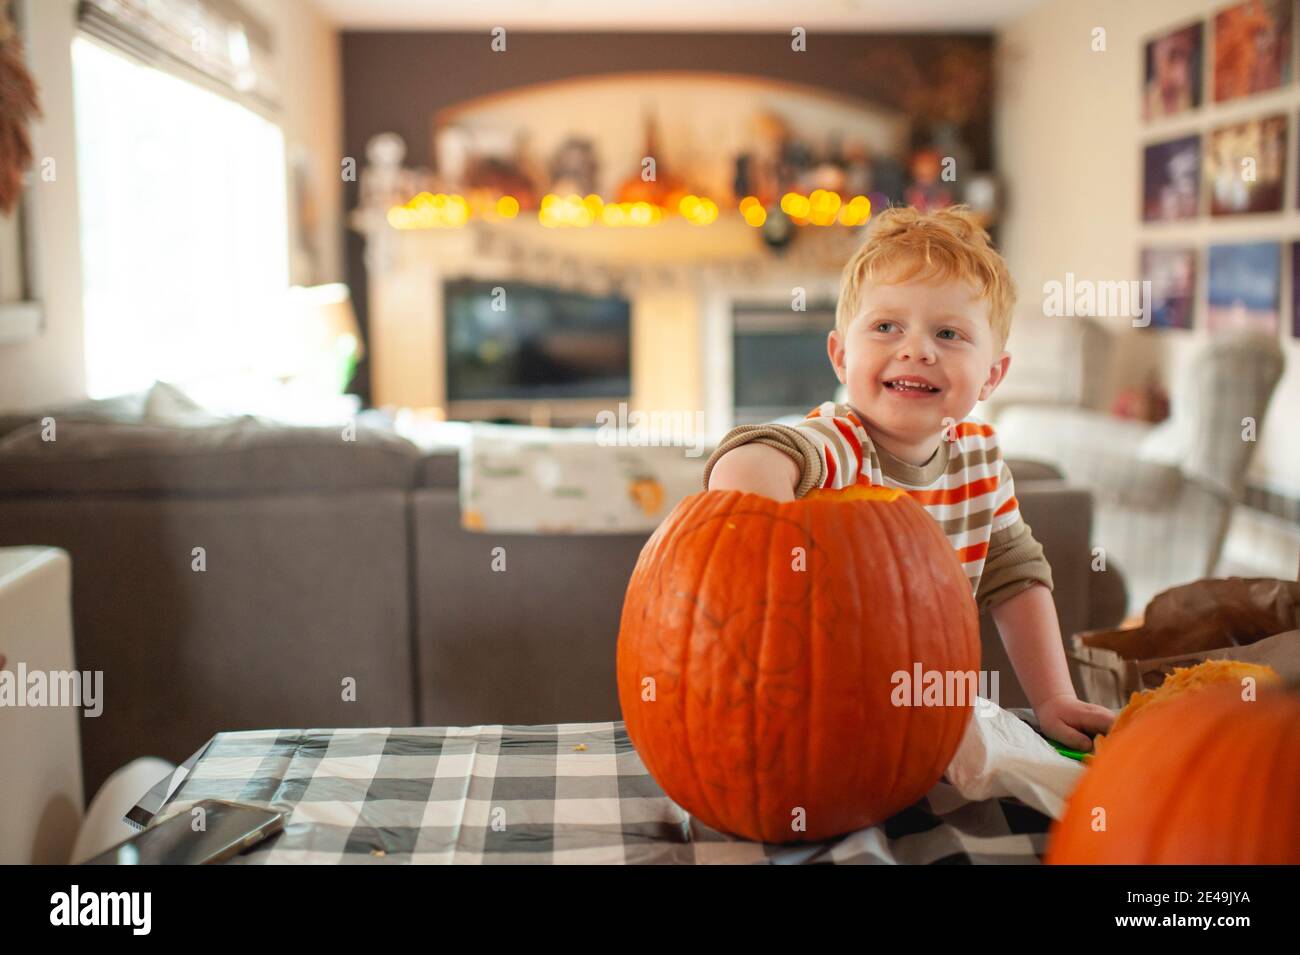 Toddler boy 3-4 years old scoops out pumpkin seeds with his hand Stock Photo